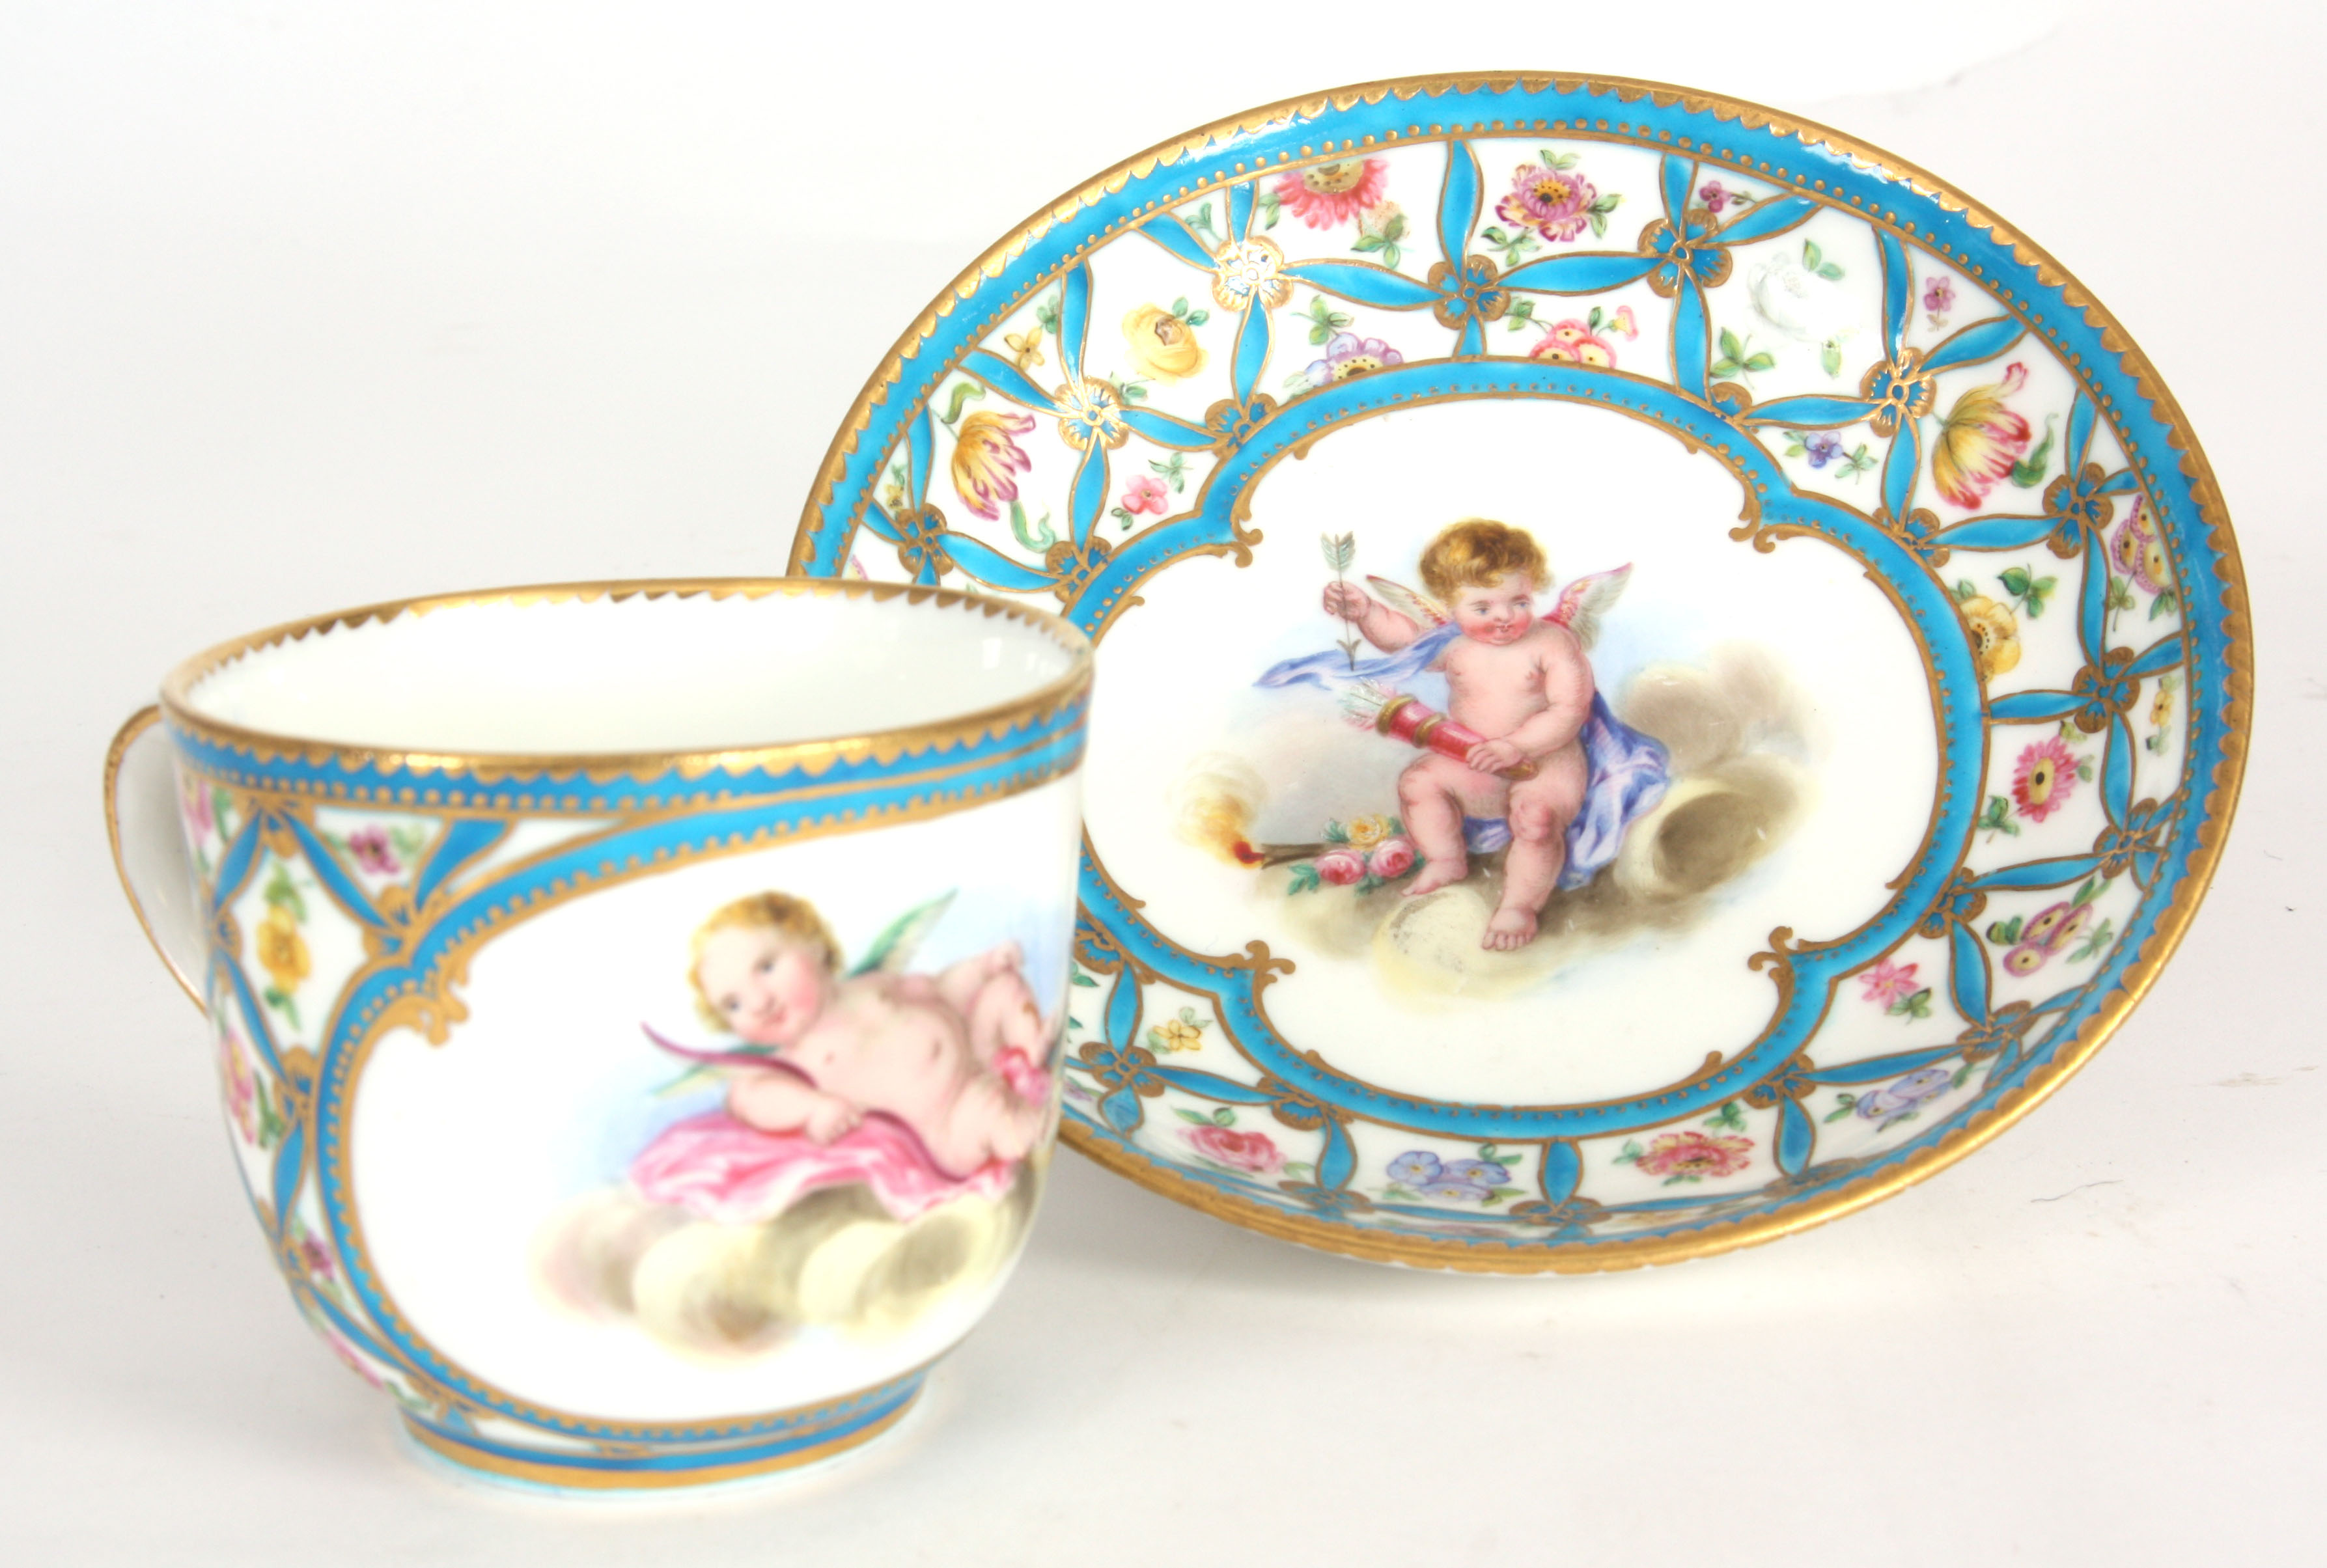 AN EARLY 19th CENTURY SERVES CUP AND SAUCER with flower and blue trellis decoration and painted